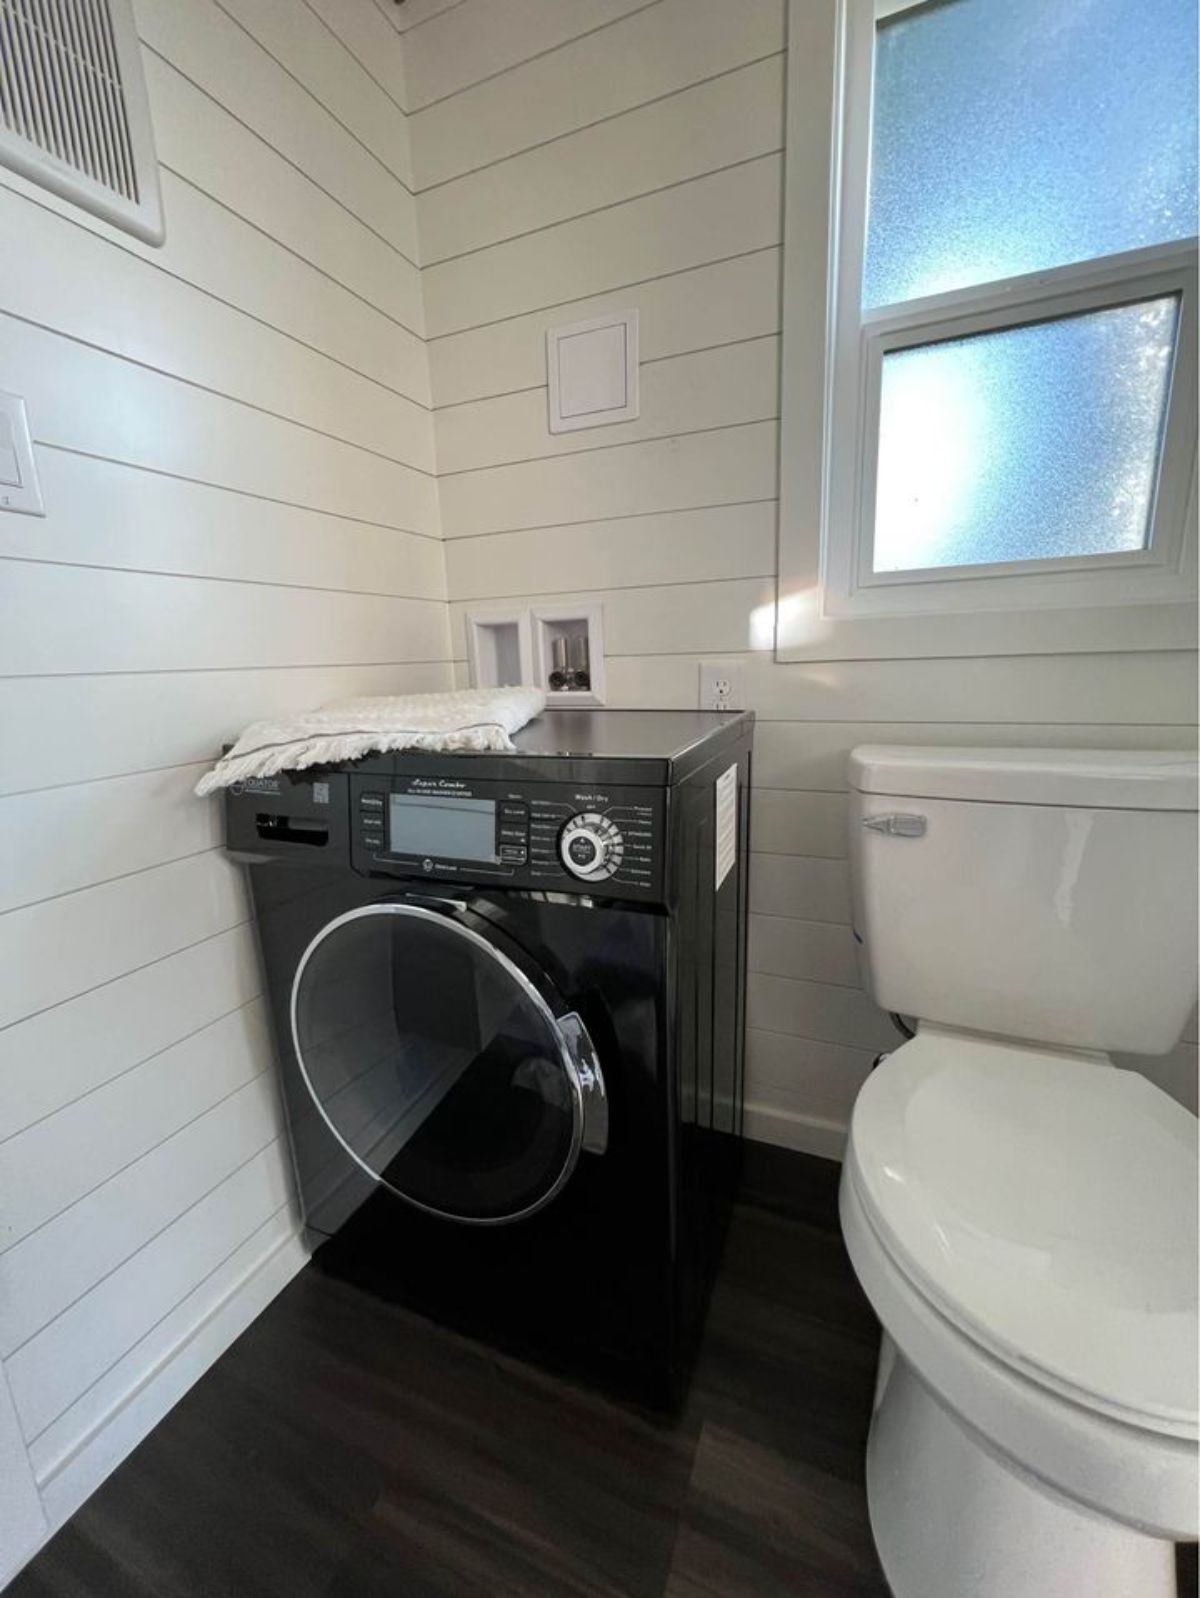 Toilet and washing machine of Modern Tiny Home on Wheels